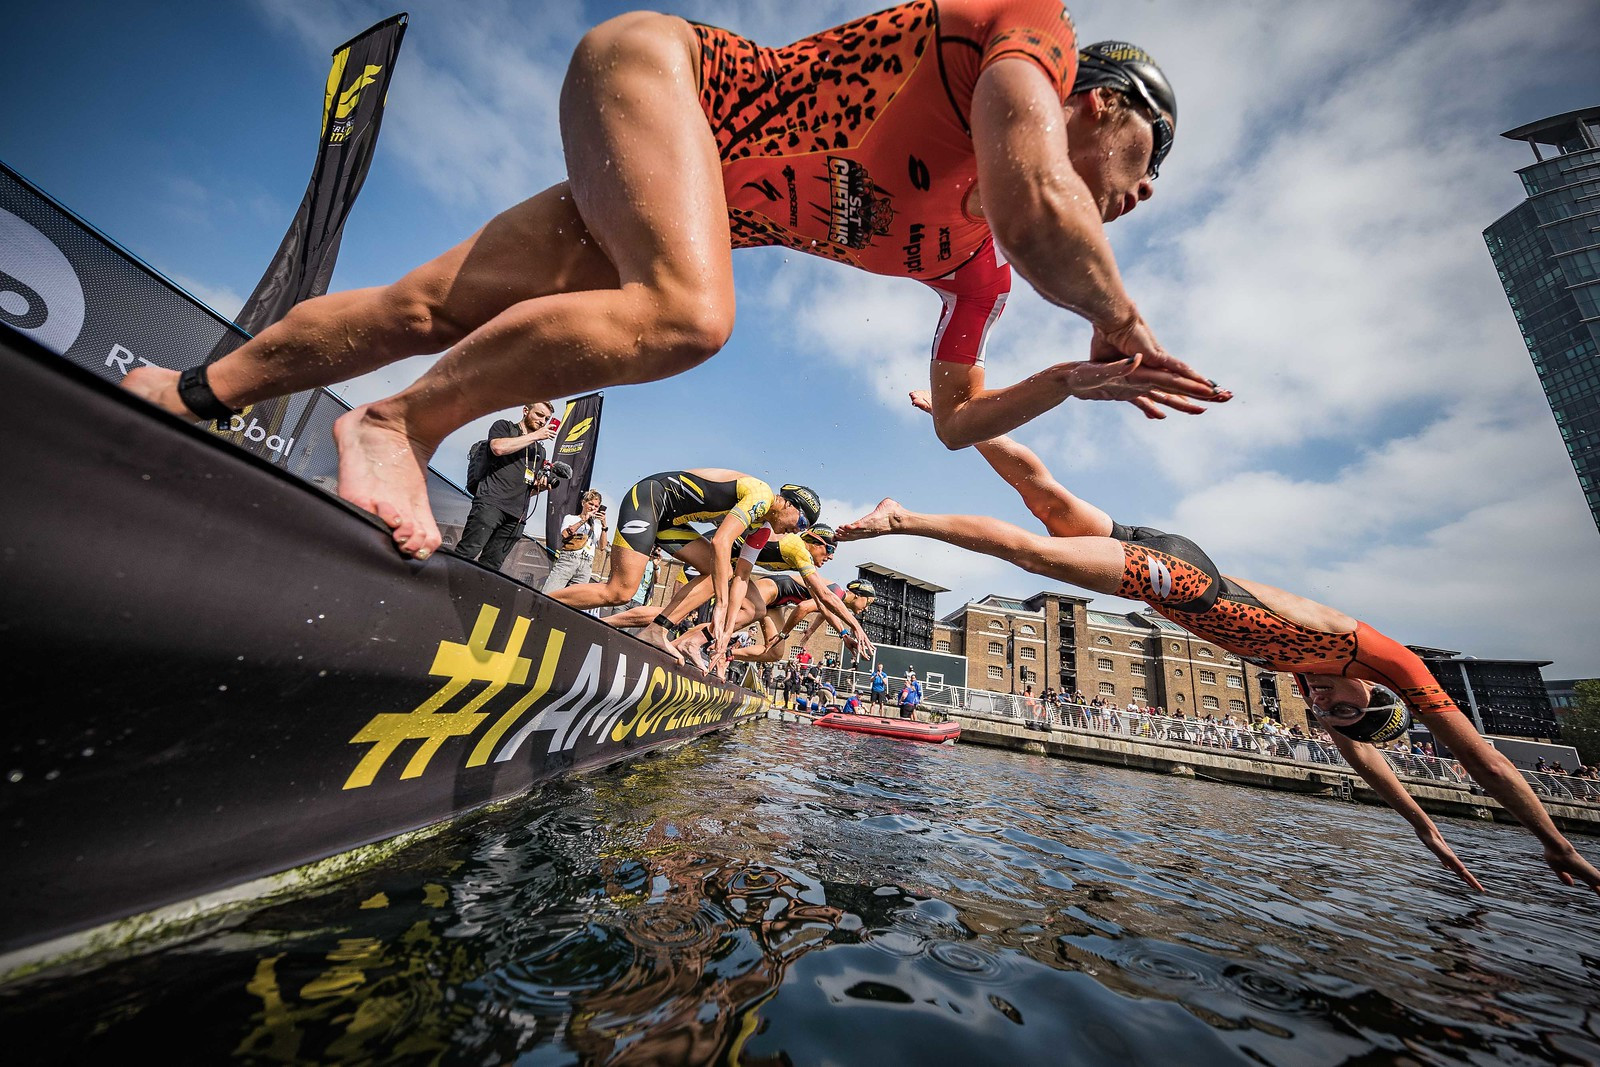 London is set to stage a Super League Triathlon Championship Series event again next year, while Leonid Boguslavsky revealed discussions are ongoing over potential new hosts ©SLT